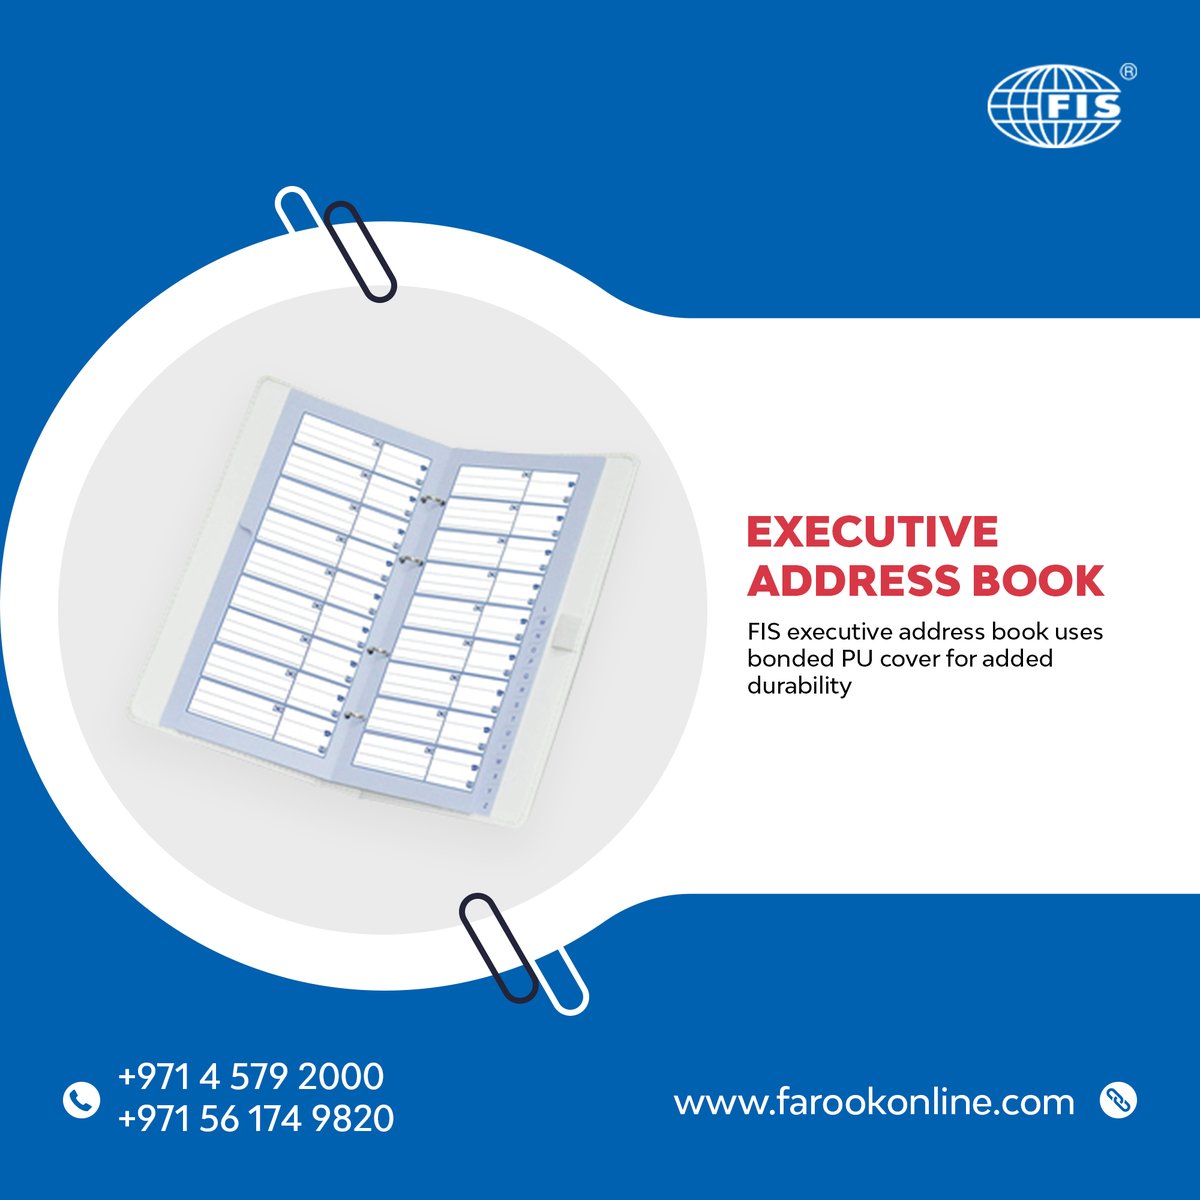 #FIS #executive #addressbook
.
To purchase FIS executive #address #book (English, #italianPU padded cover with 4-O ring with #giftbox, color: white, 64 sheets, size: 250 x 135 mm - FSAD25X13.5PUGE)
farookonline.com/product/FSAD25…